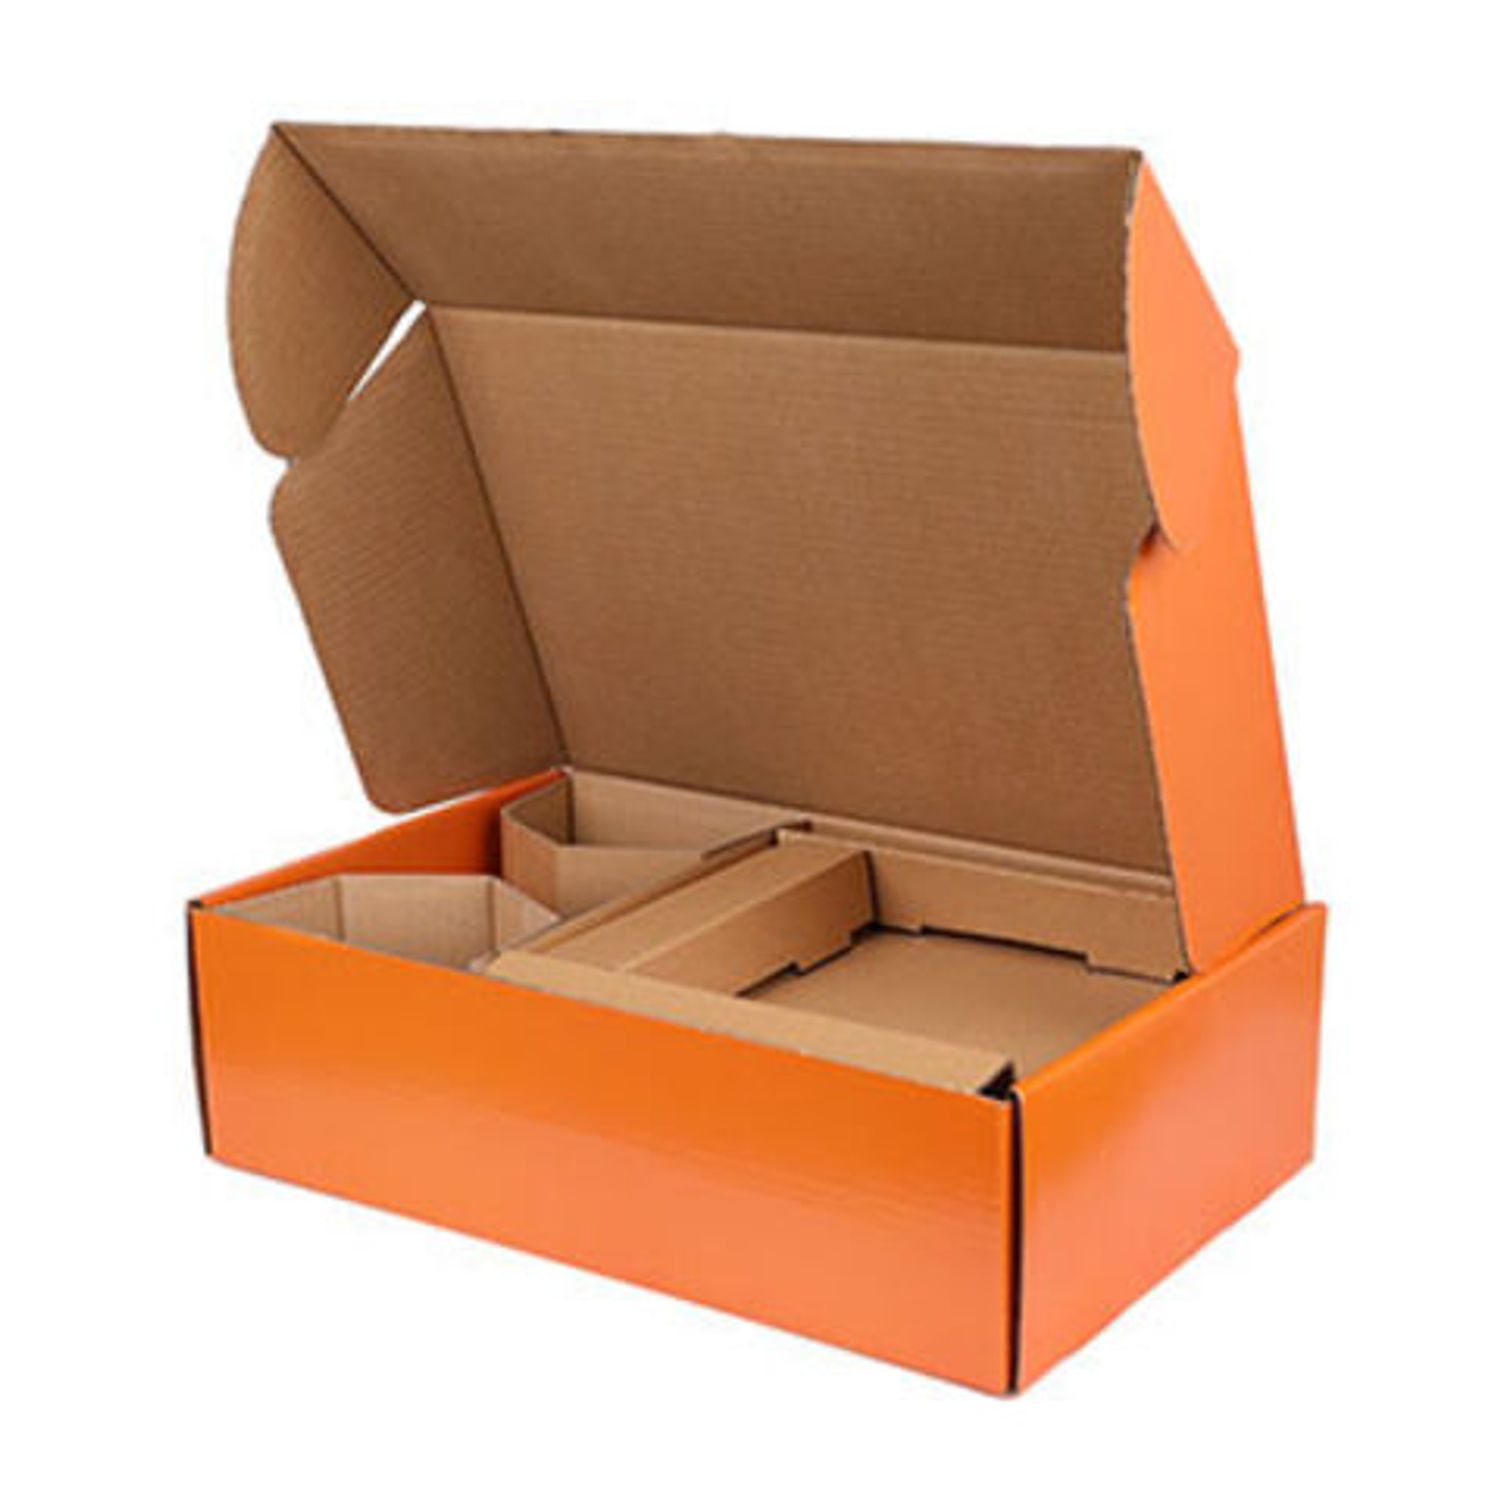 Custom Offset Printing Colors 3 Ply Corrugated Holographic Carton Boxes With Insert Slots